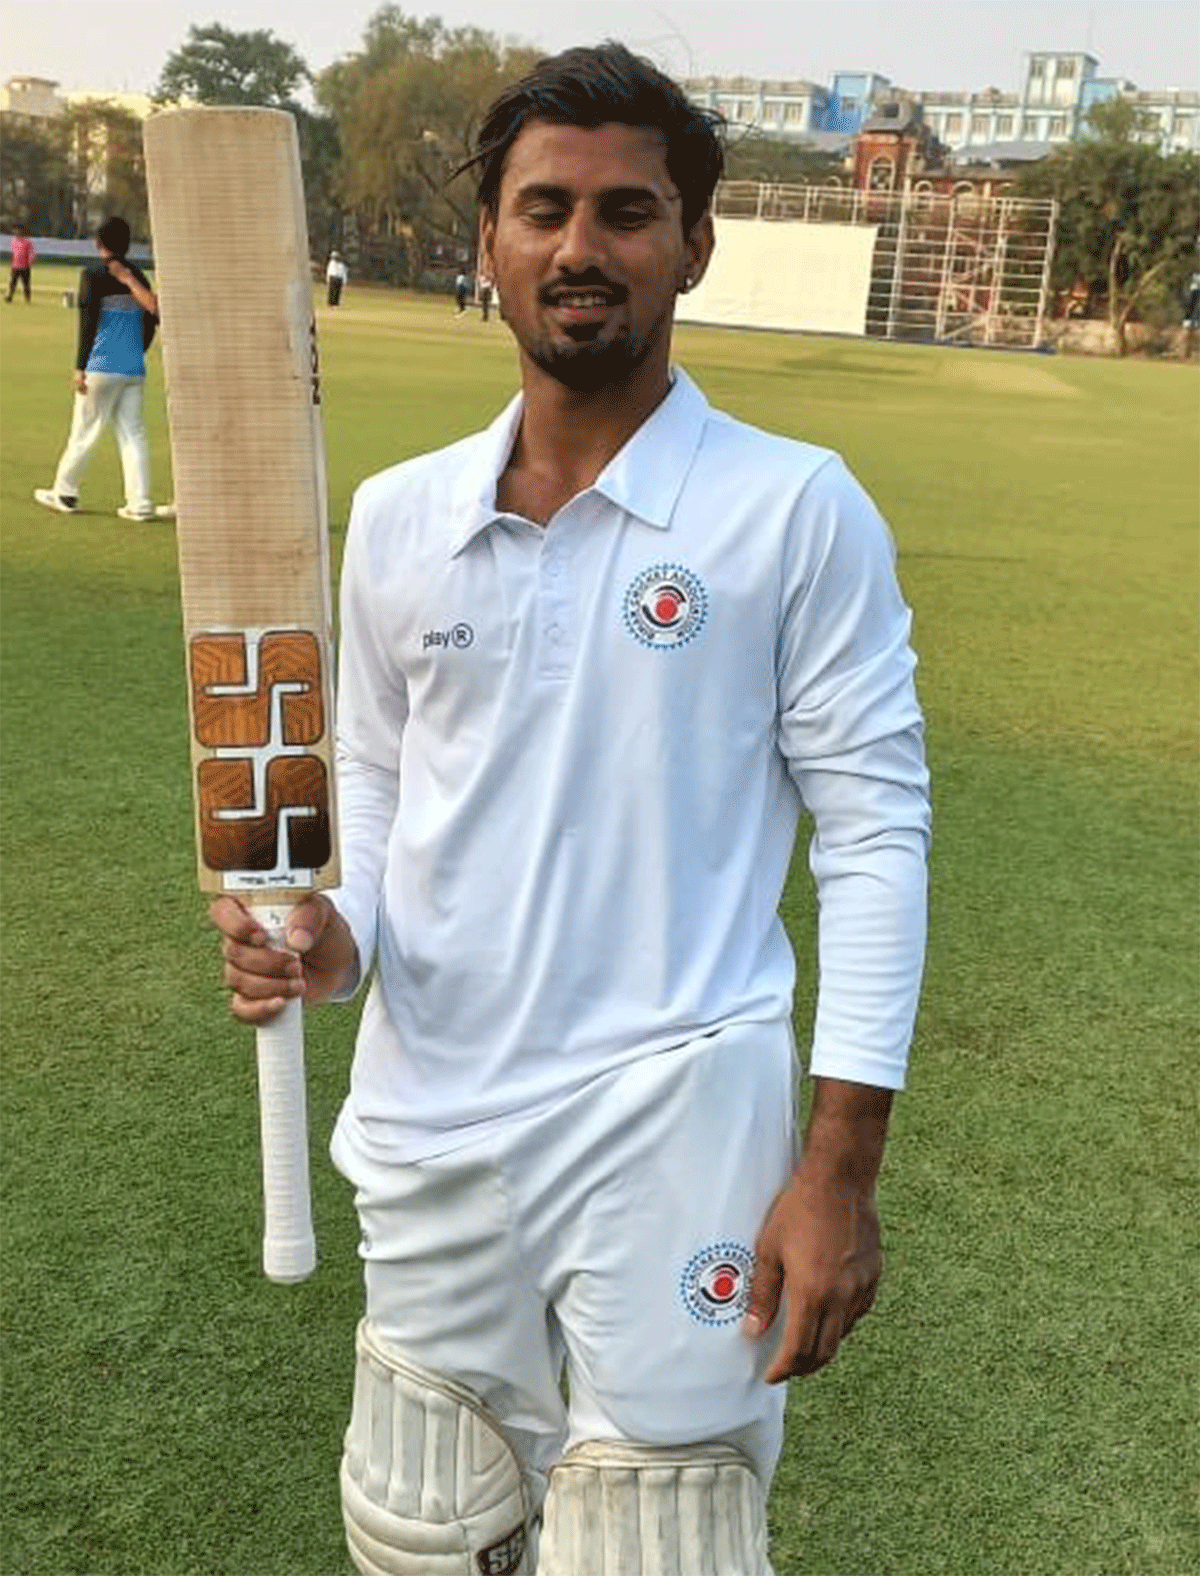 Sakibul Gani, playing for Bihar, smashed an astounding 341 in the Ranji Trophy Plate Group match against Mizoram on Friday to break the world record for the highest individual score on first-class debut.